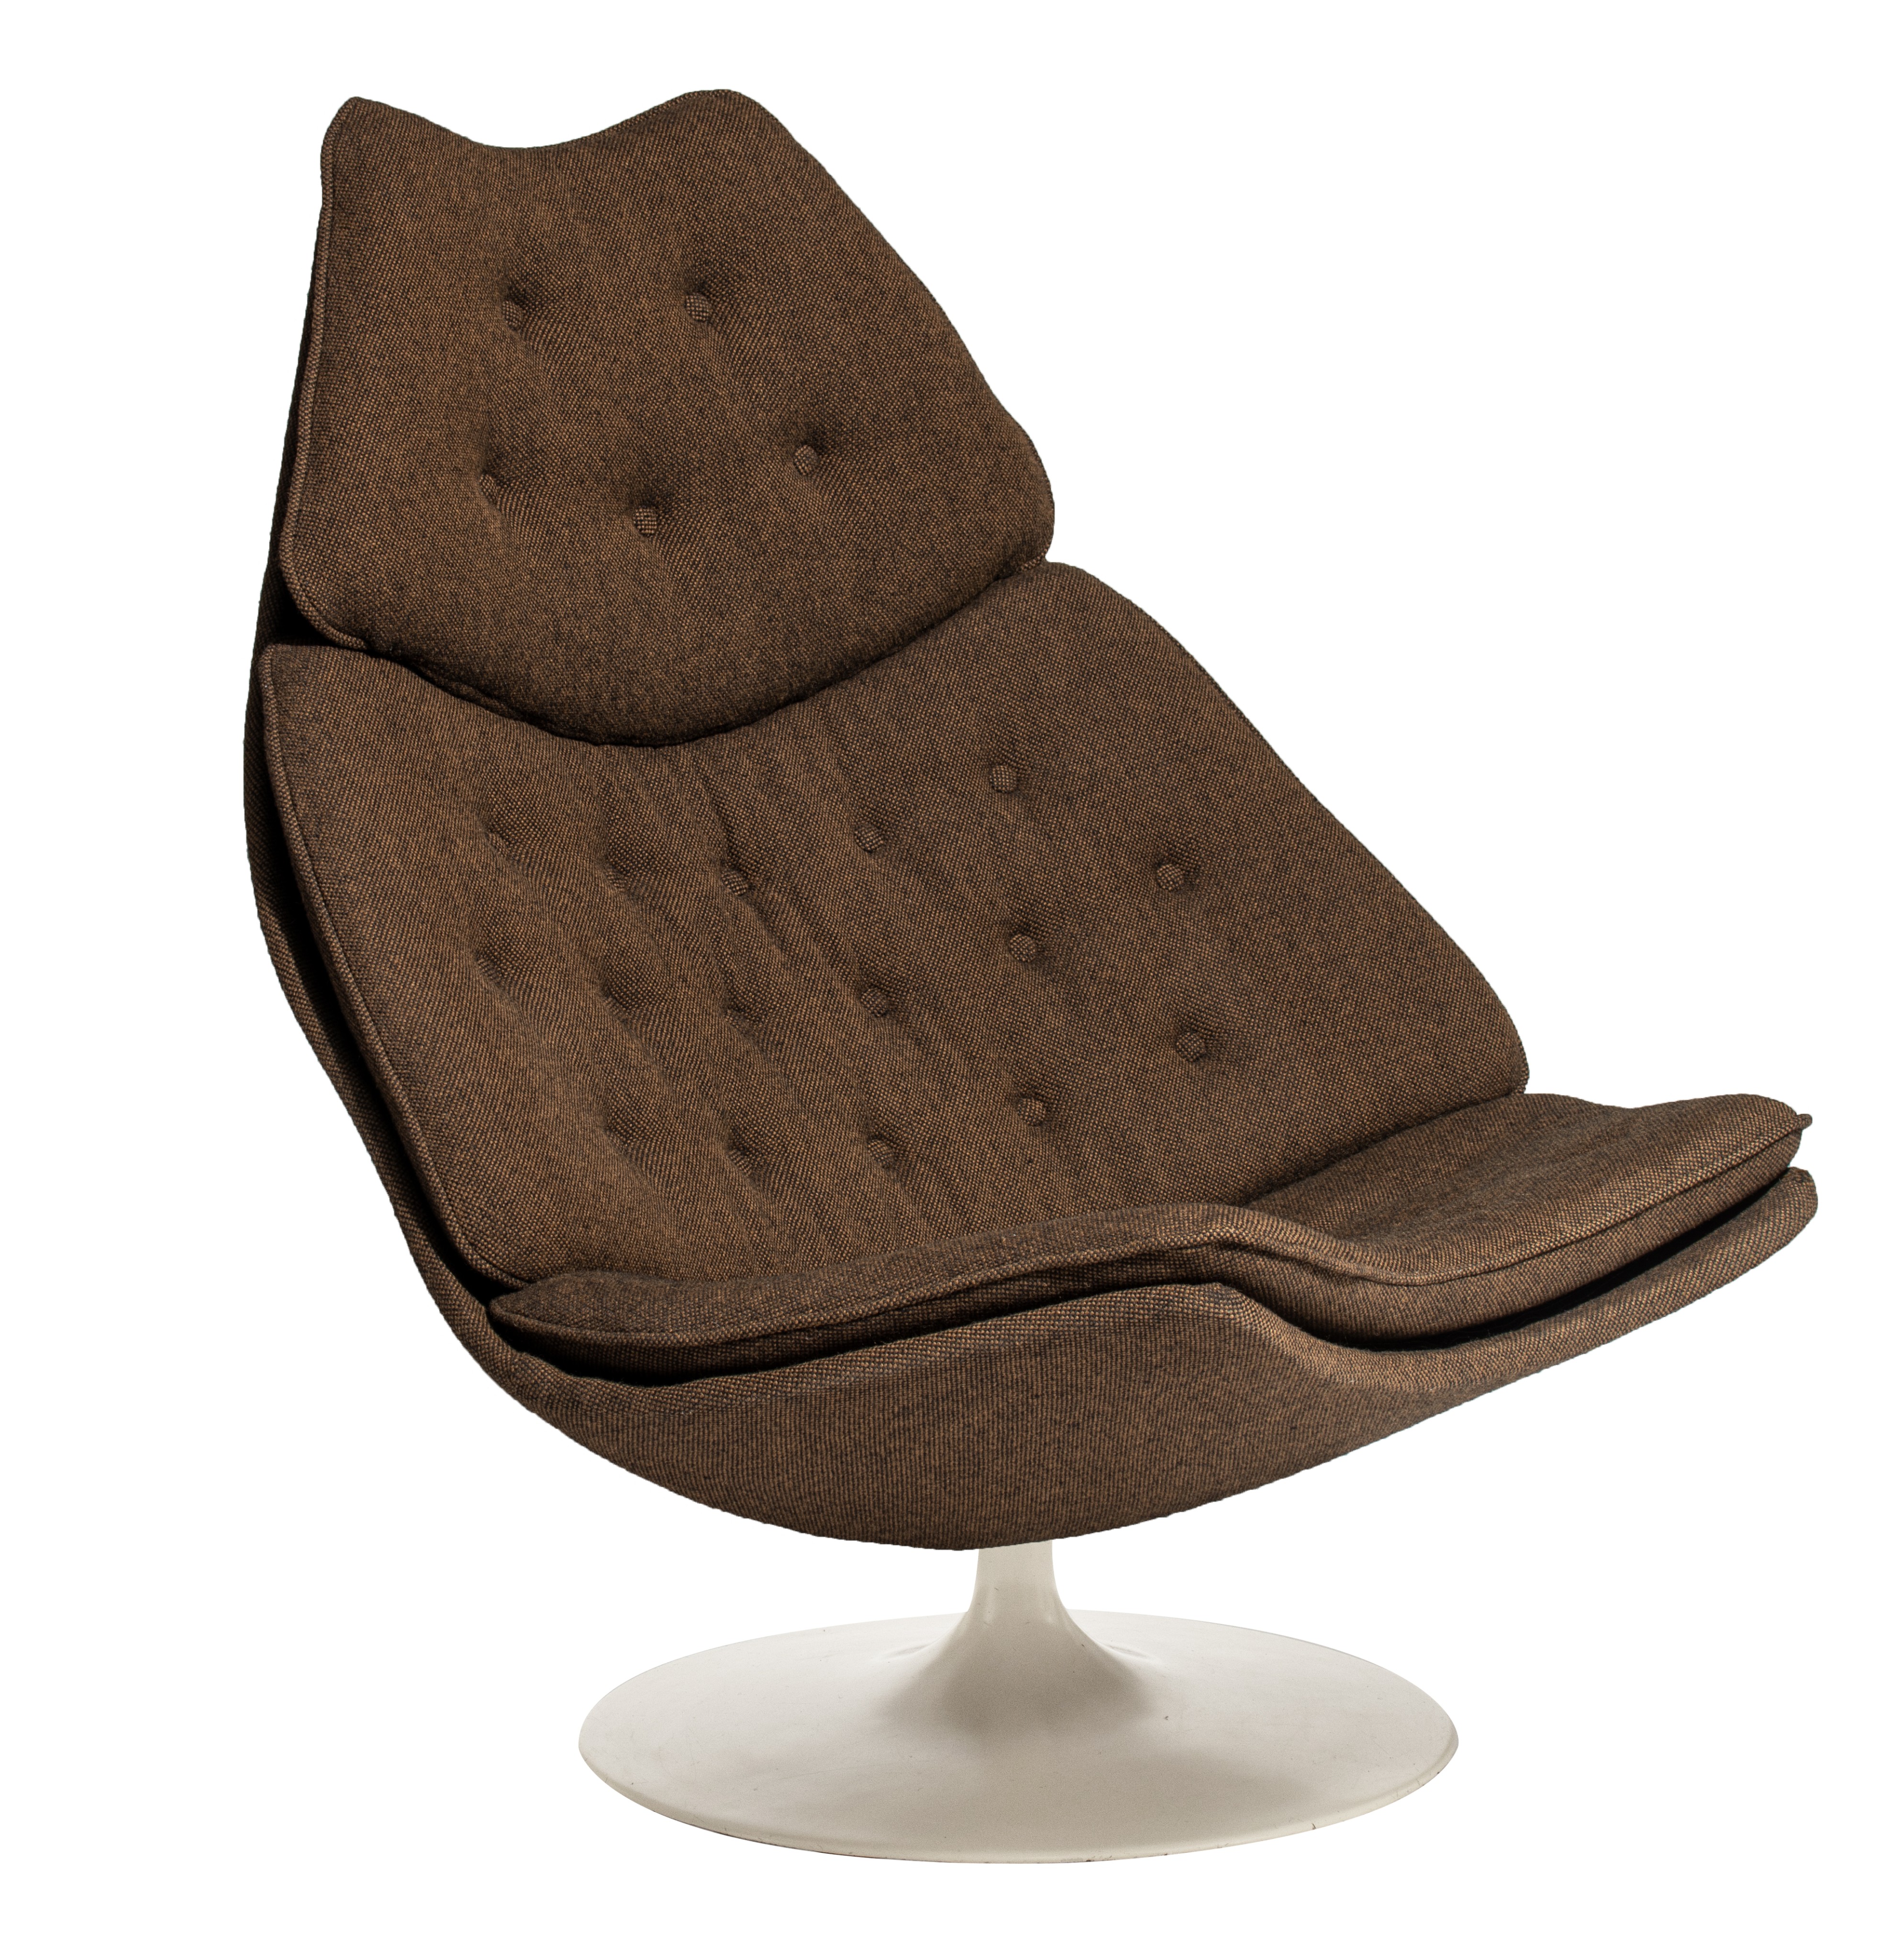 An F 588 easy chair by Geoffrey Harcourt for Artifort, Netherlands, 1966, H 100 - W 92 cm